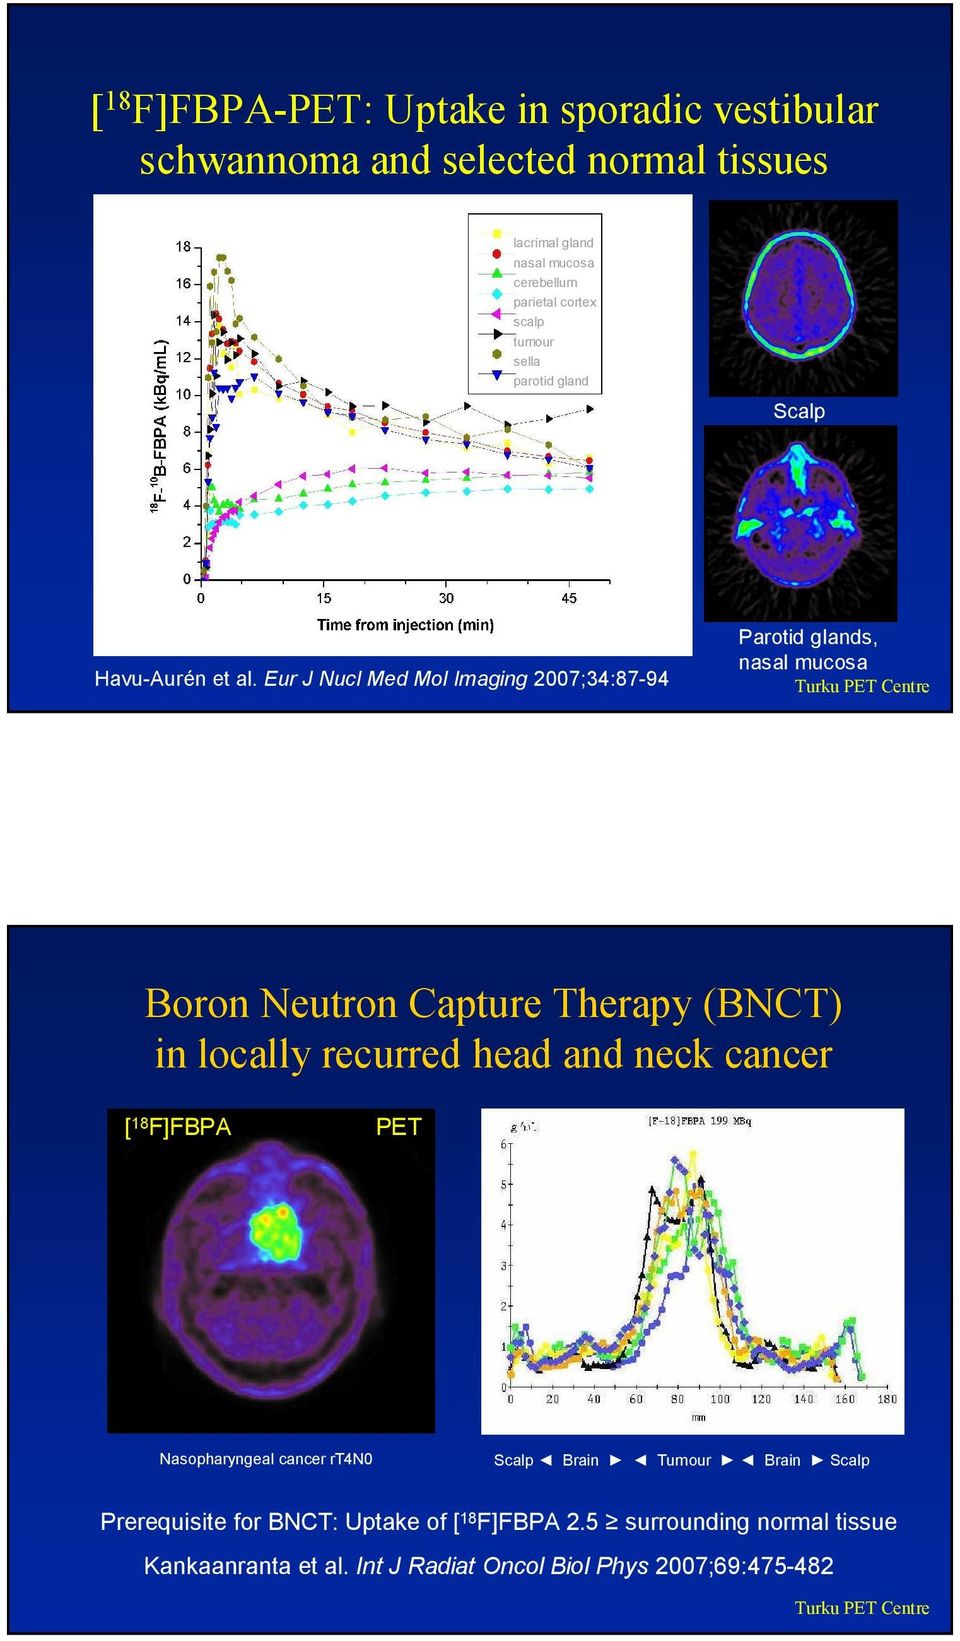 Eur J Nucl Med Mol Imaging 2007;34:87-94 Parotid glands, nasal mucosa Boron Neutron Capture Therapy (BNCT) in locally recurred head and neck